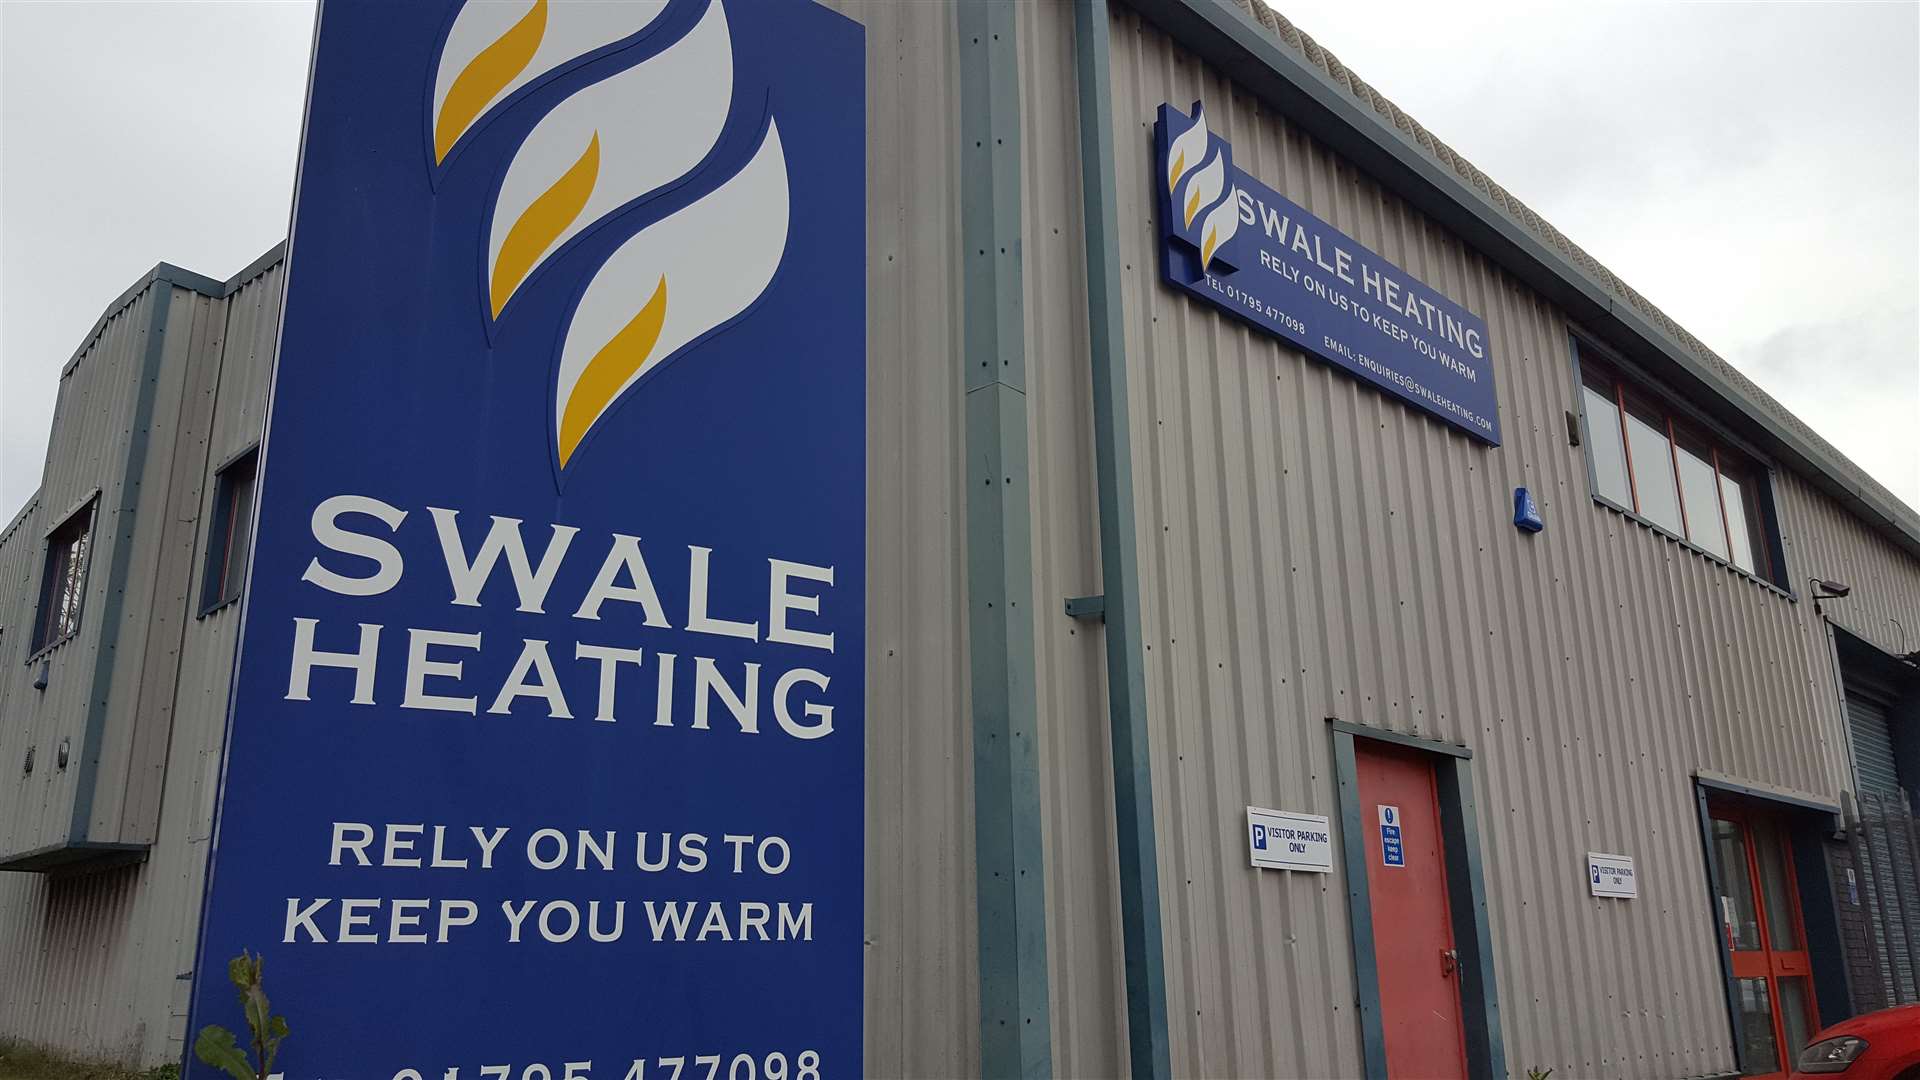 At Swale Heating men are paid 38.5% more than their female counterparts